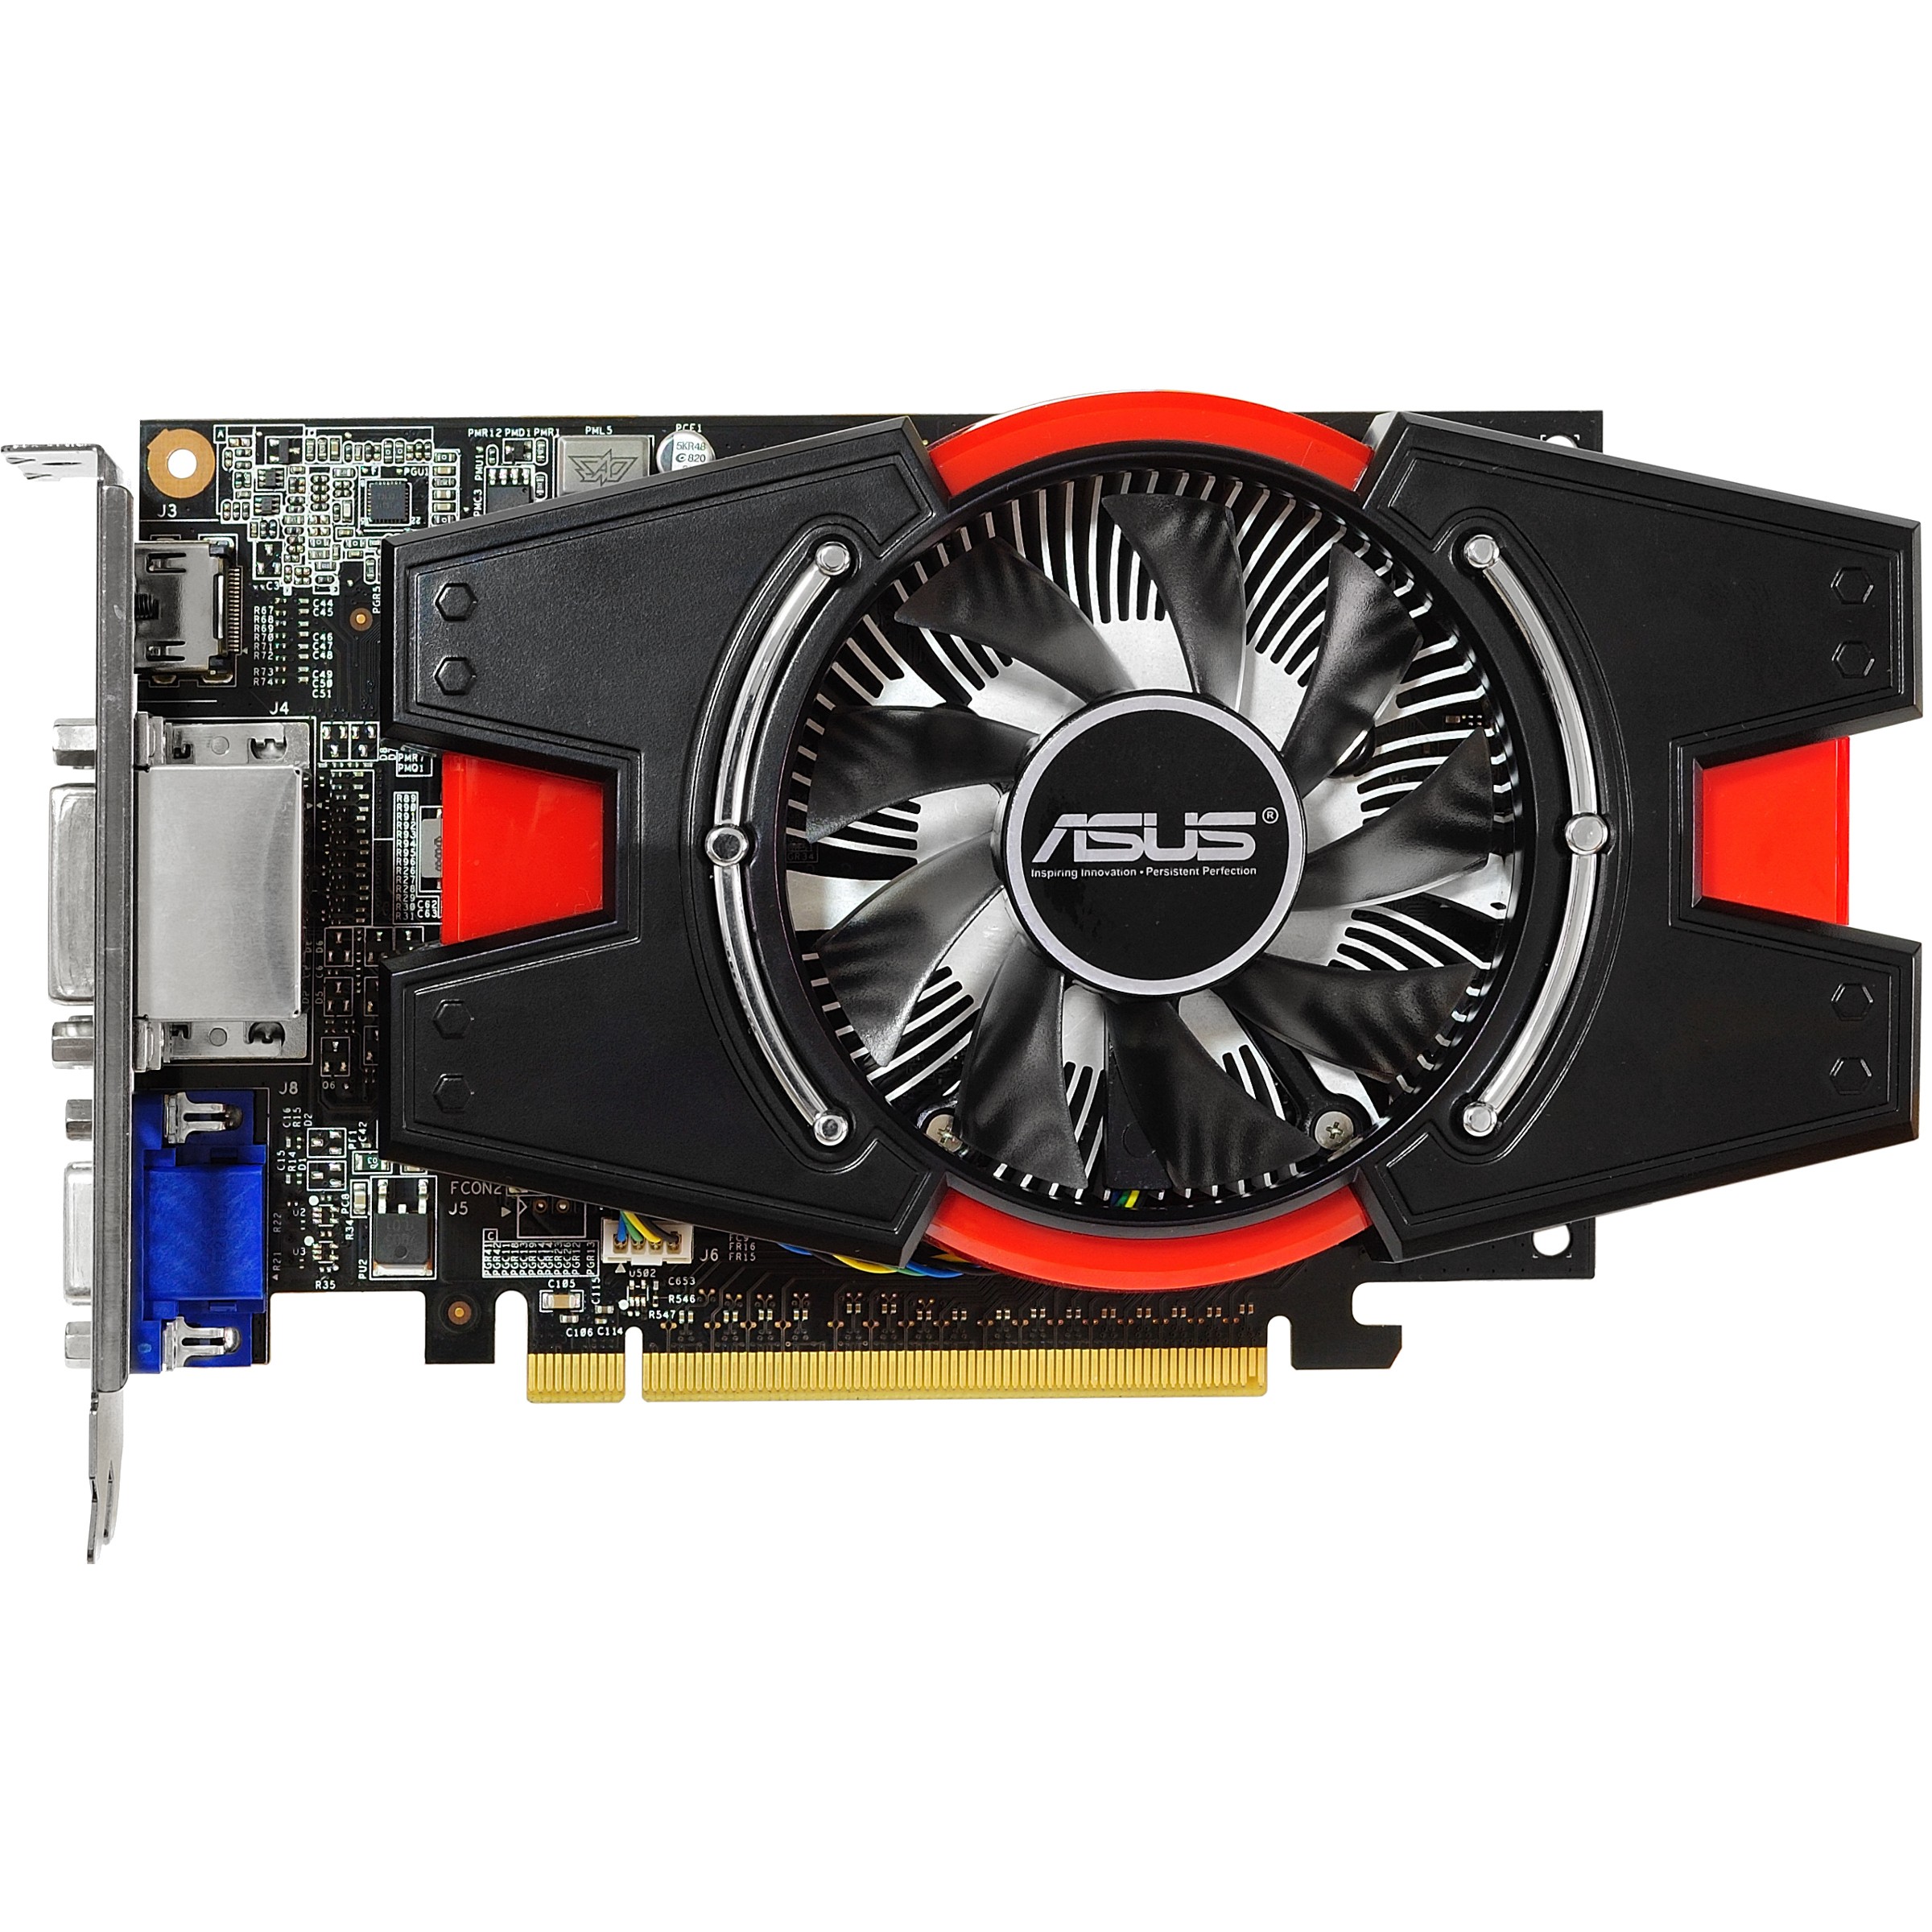 Best Buy: Asus GeForce GT 640 Graphic Card 901 MHz Core 2 GB DDR3